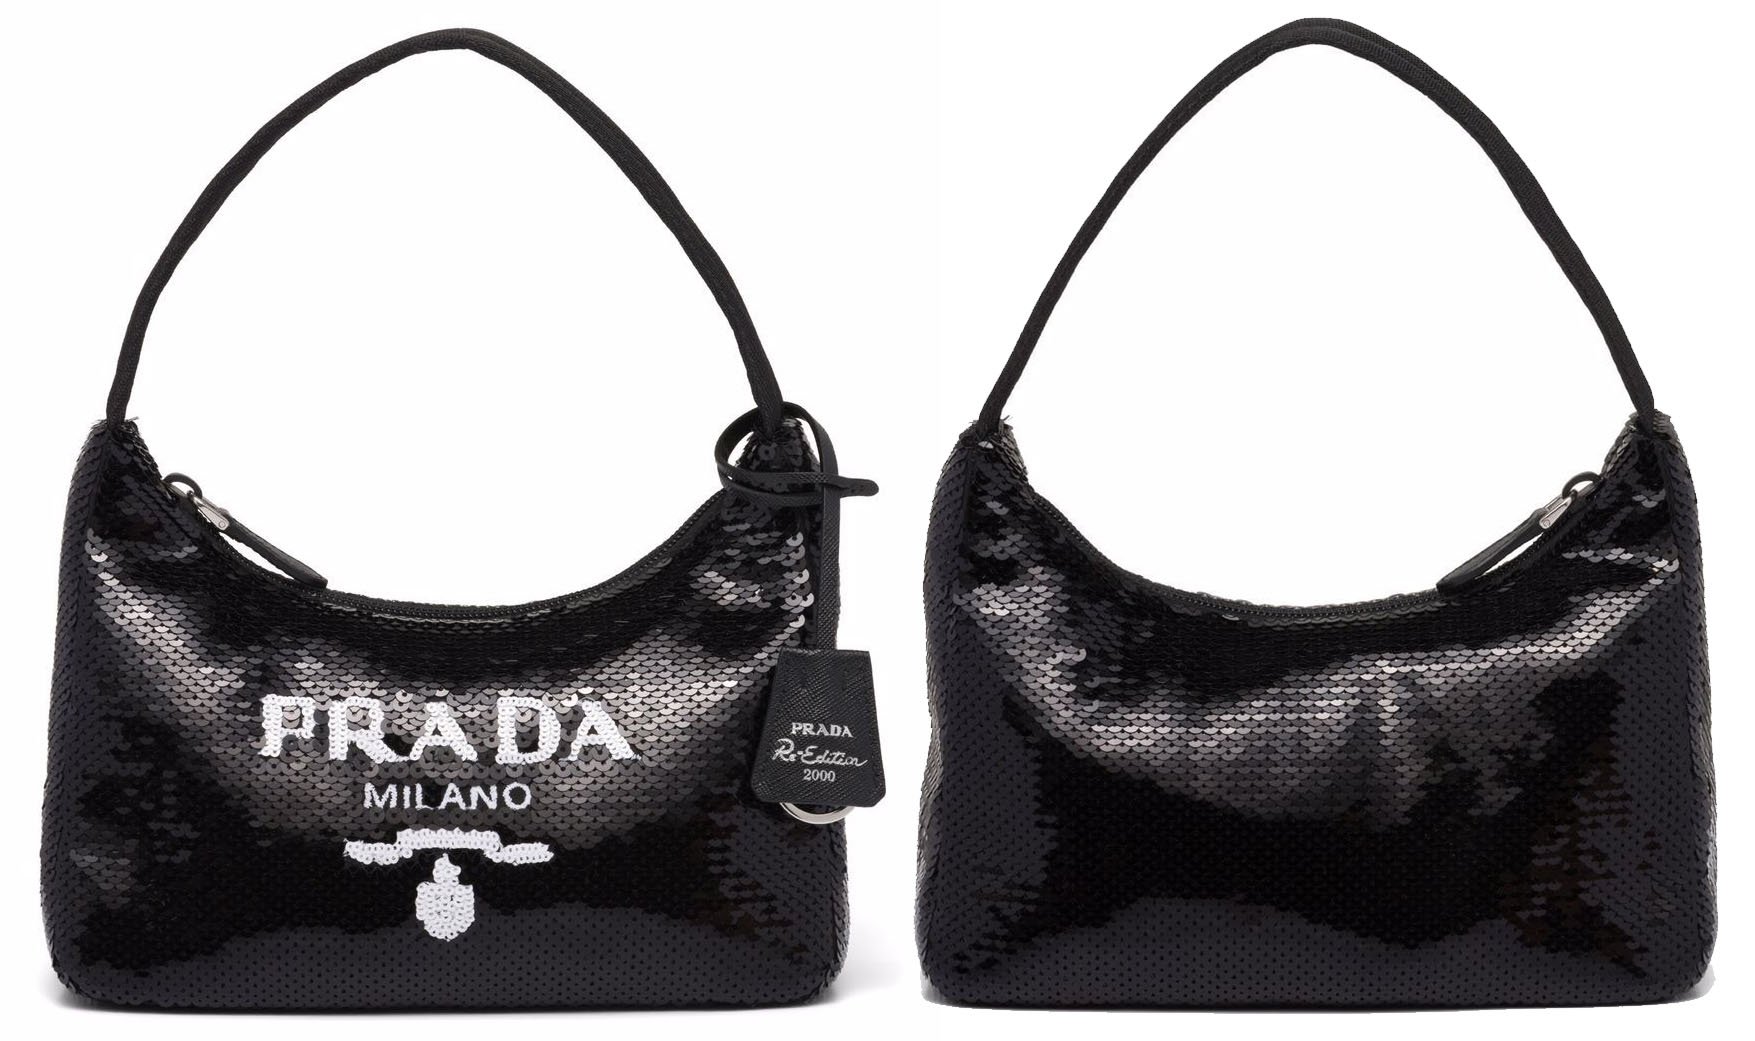 Prada's latest interpretation of the iconic Re-Edition 2000 mini bag, this bag is crafted in the brand's signature Re-Nylon covered with all-over sequins